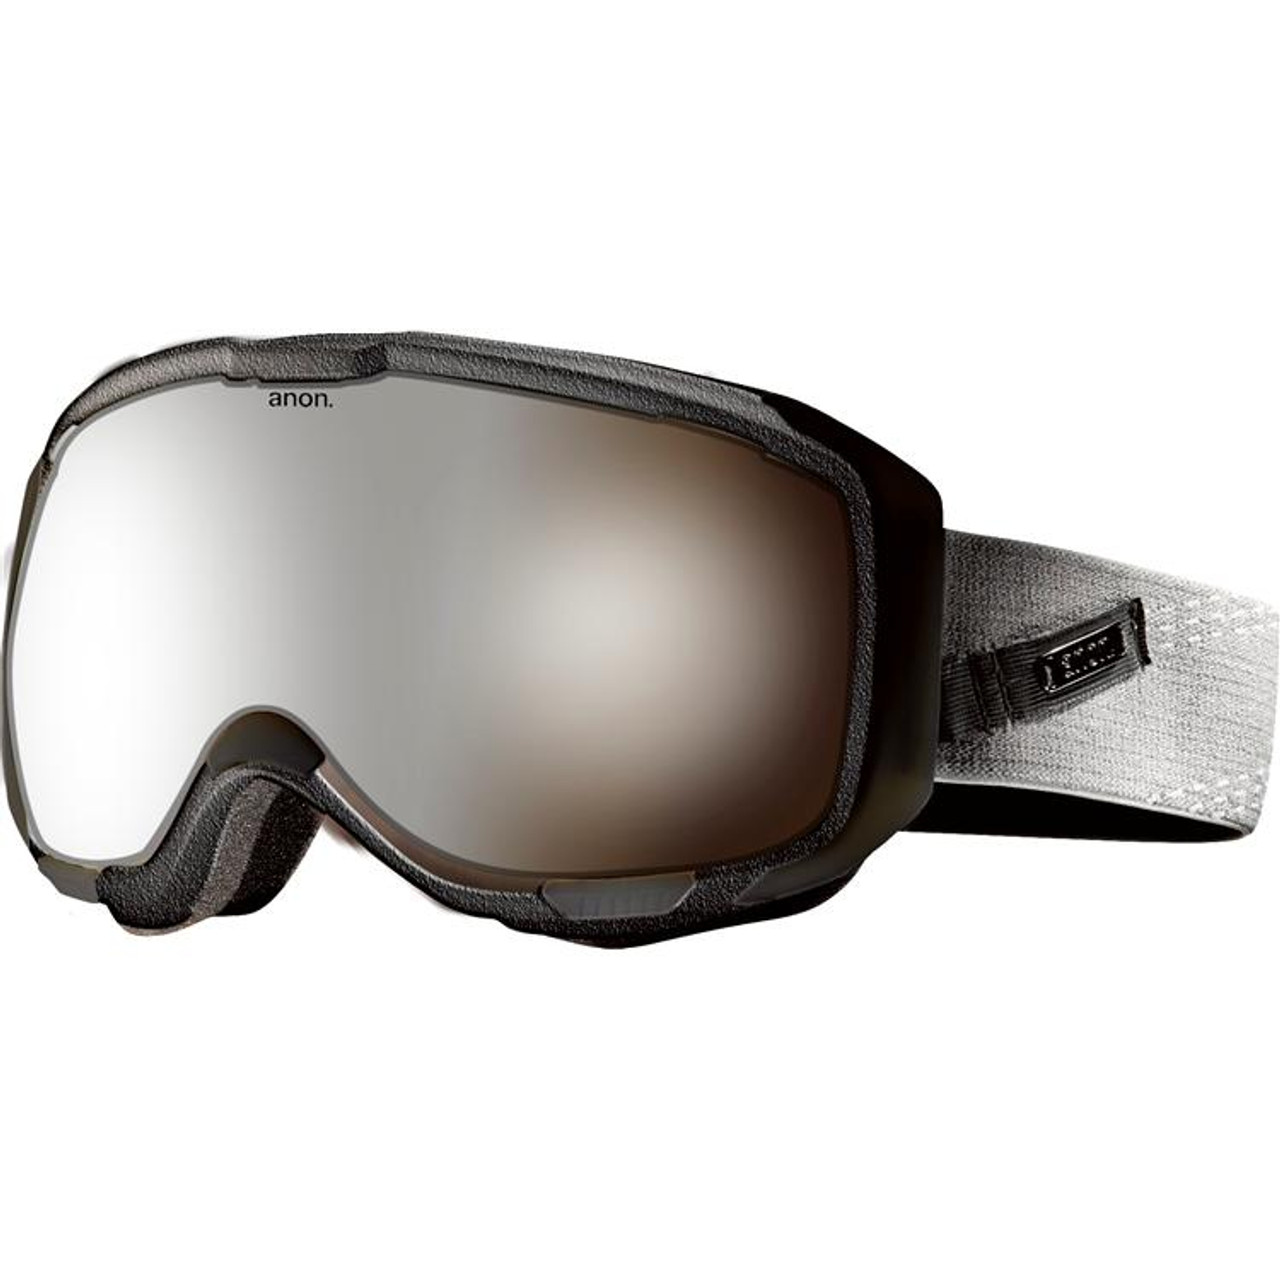 Anon M1 Agent Goggle with Silver Solex Lens 2013 | GetBoards.com